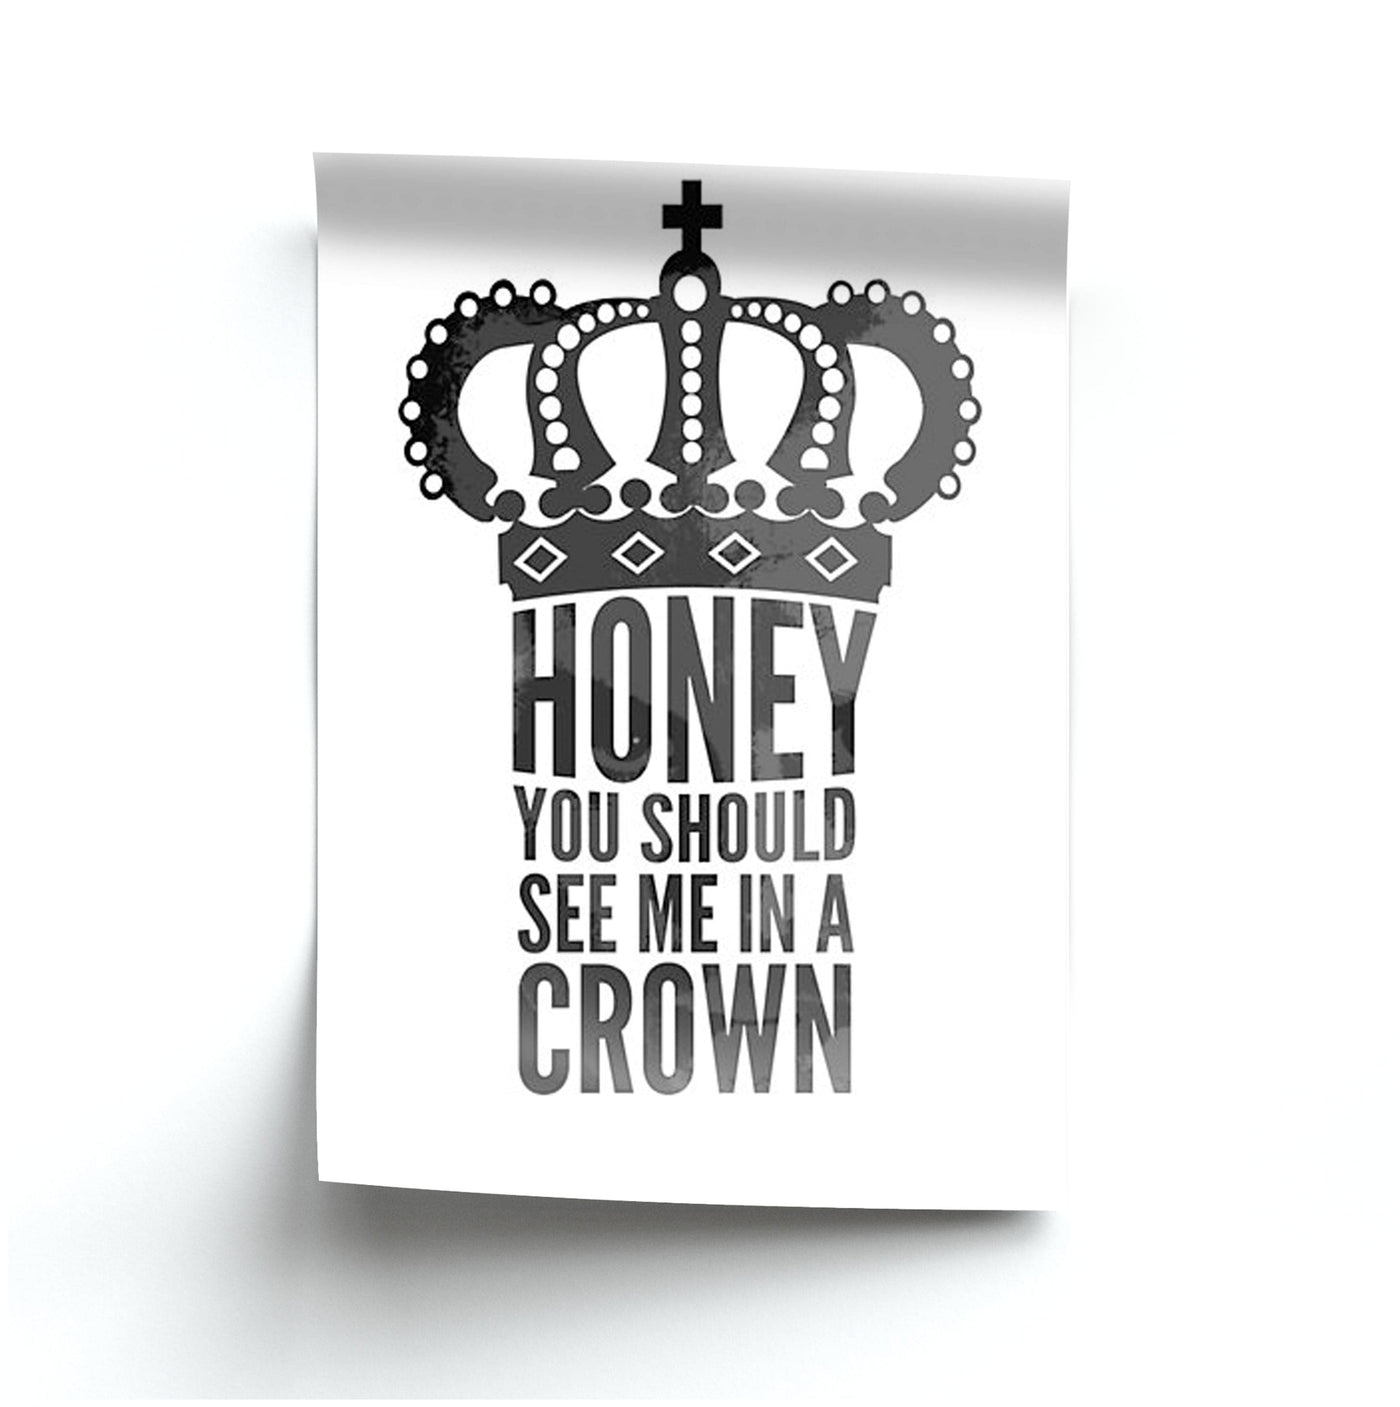 Honey You Should See Me In A Crown - Sherlock Poster